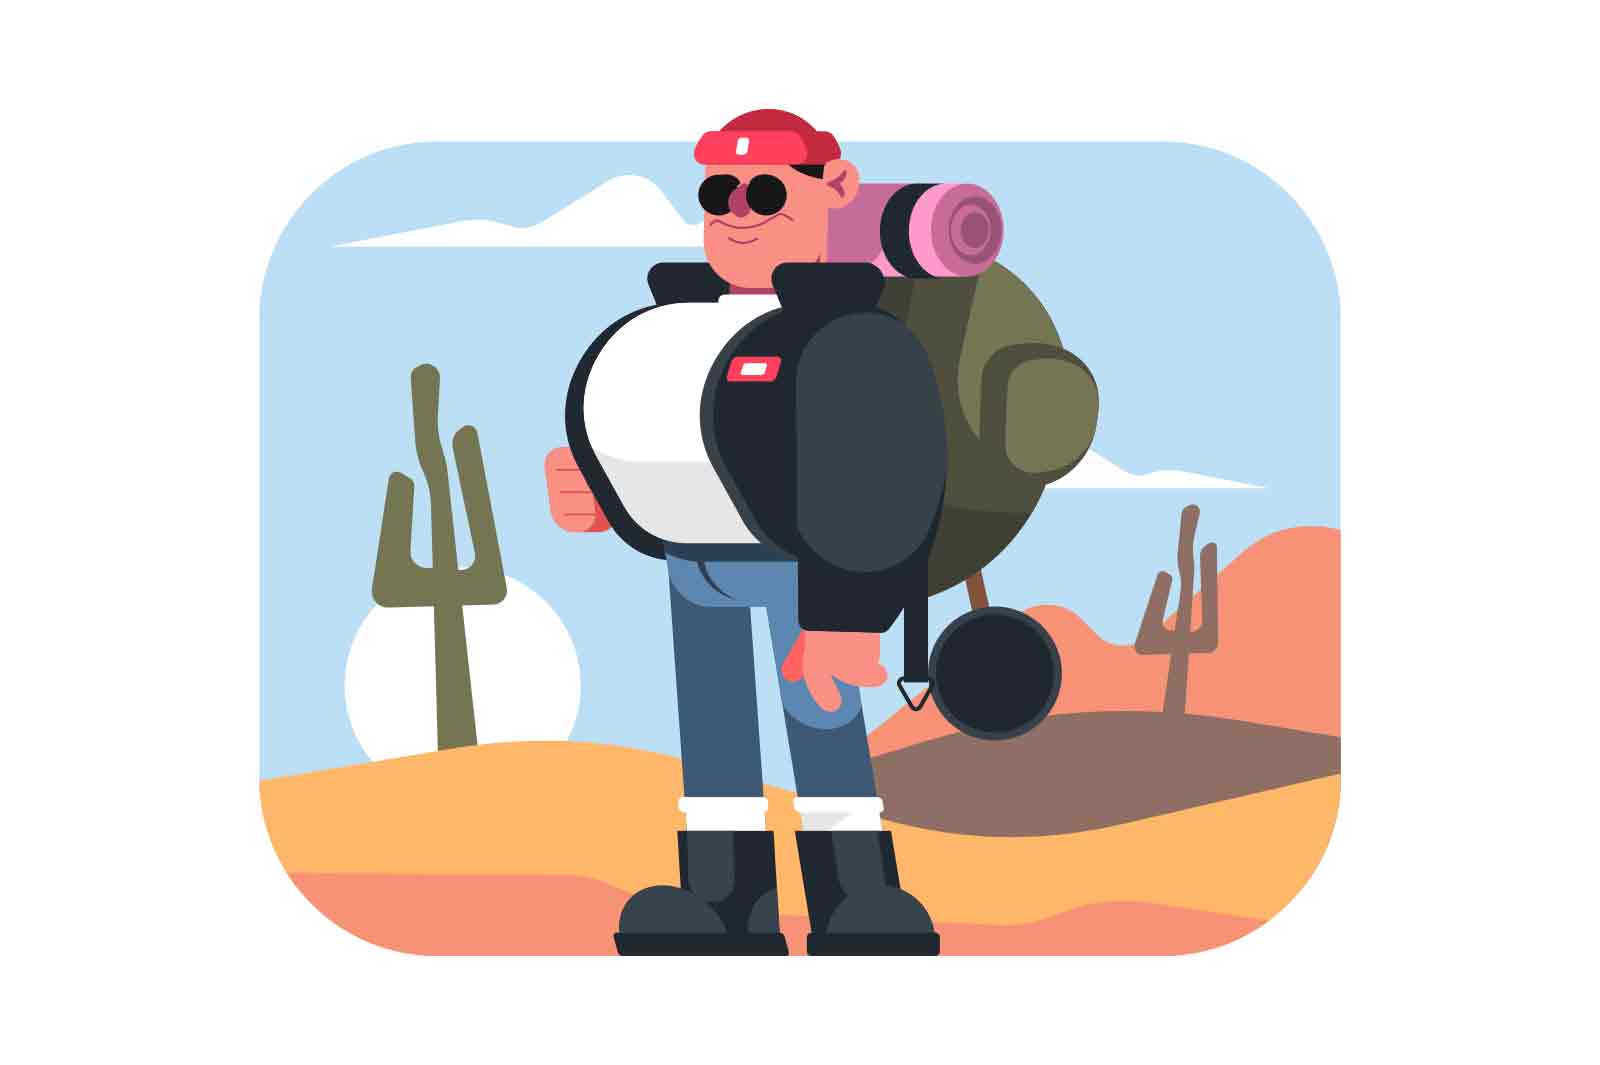 Man Travel with backpack in desert, vector illustration. Man wearing red cap, sunglasses, and black jacket. Holding frying pan and water bottle. The background is desert landscape with cacti and mountains.